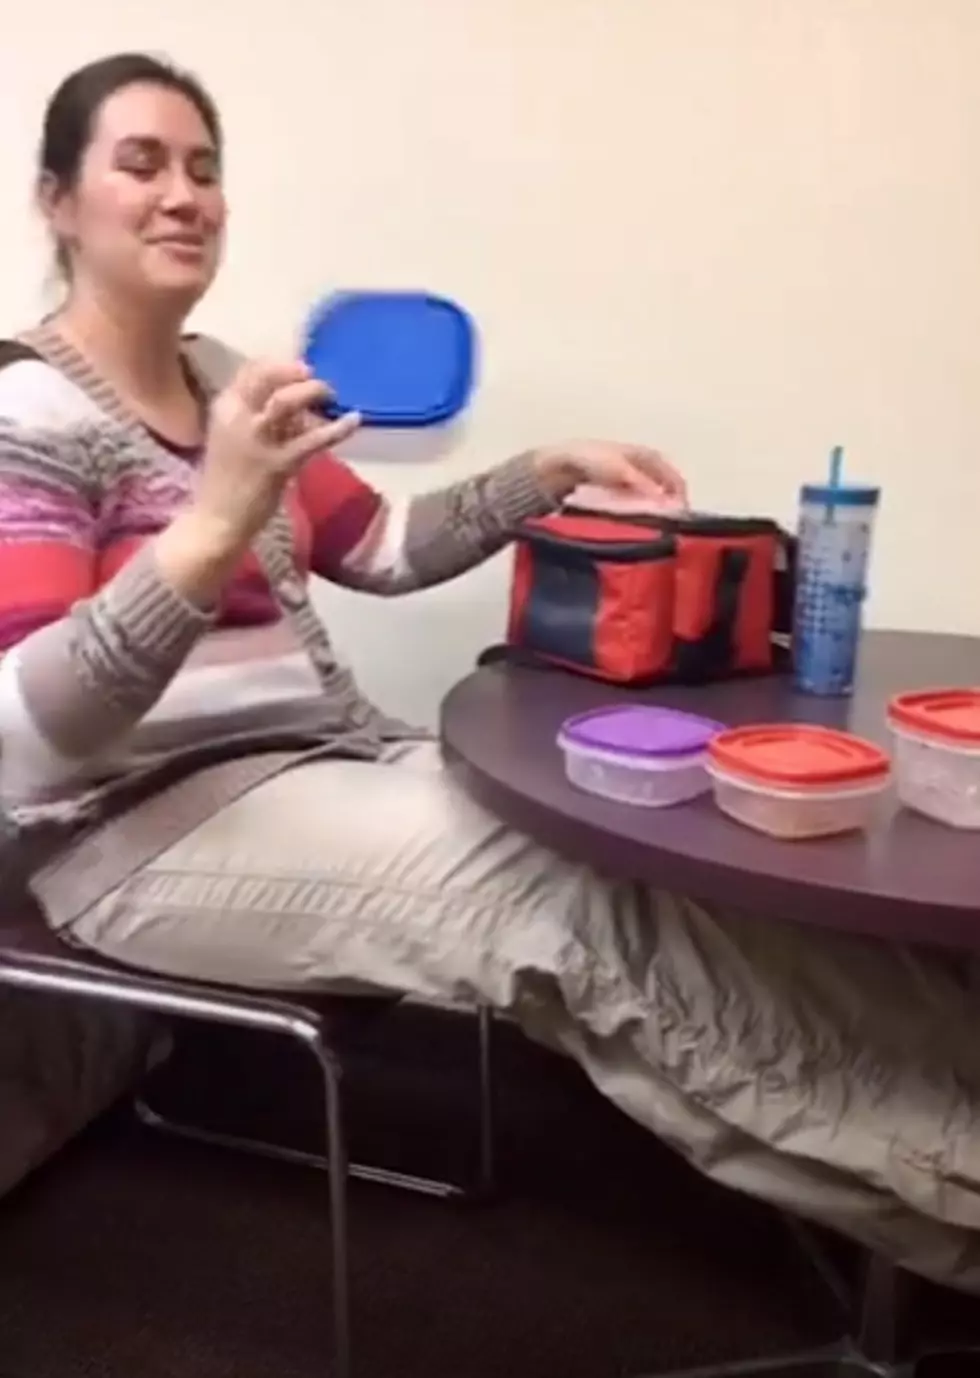 Do You Stack Tupperware This Way? [WATCH]